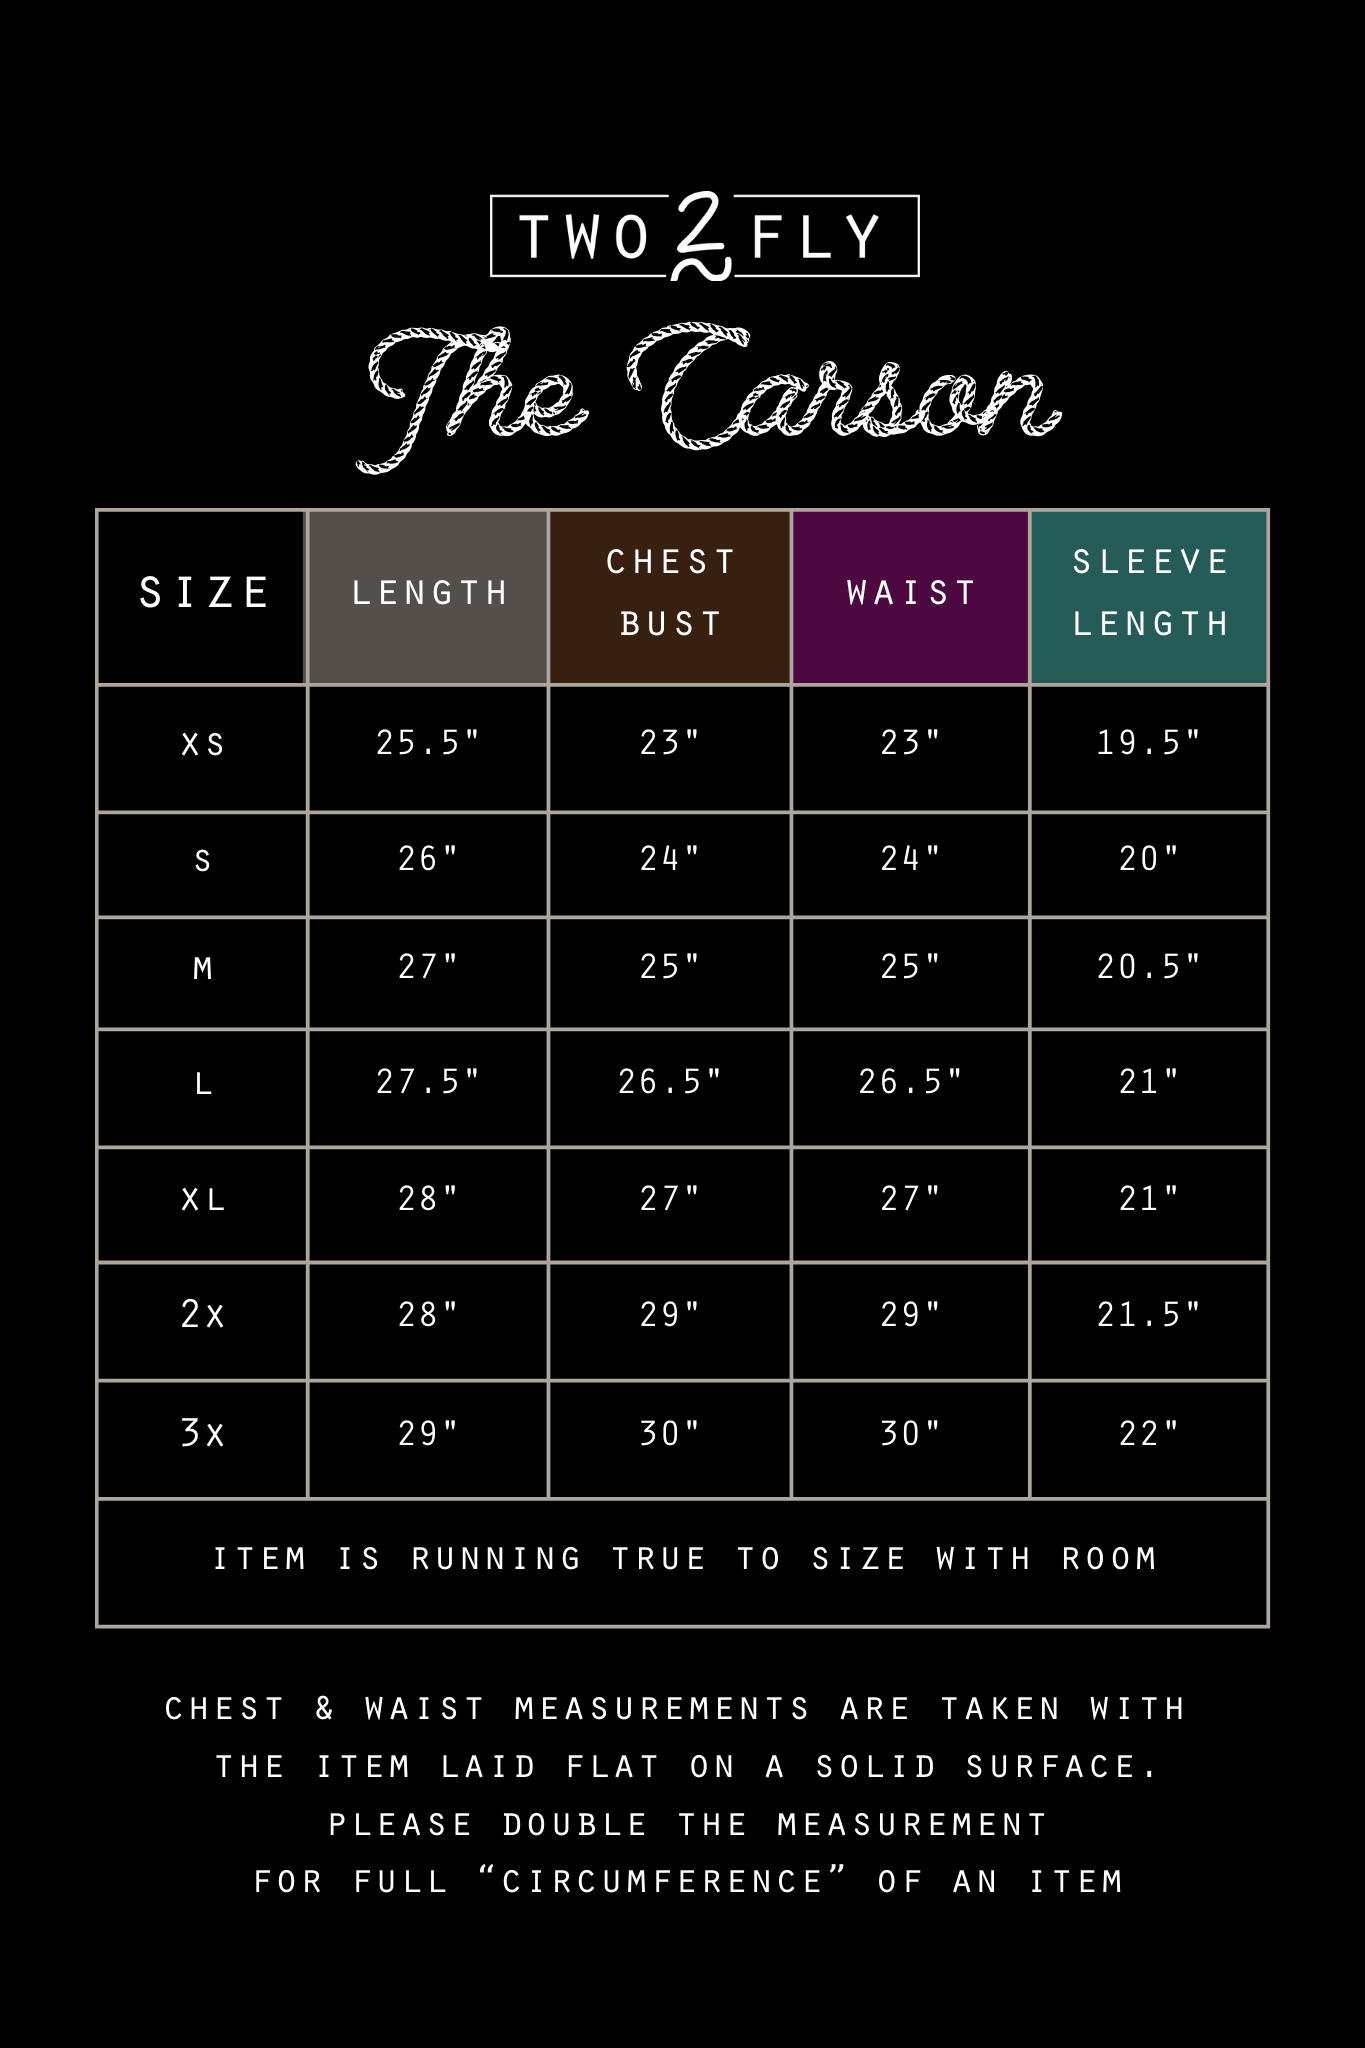 THE CARSON [MISSING SIZES]